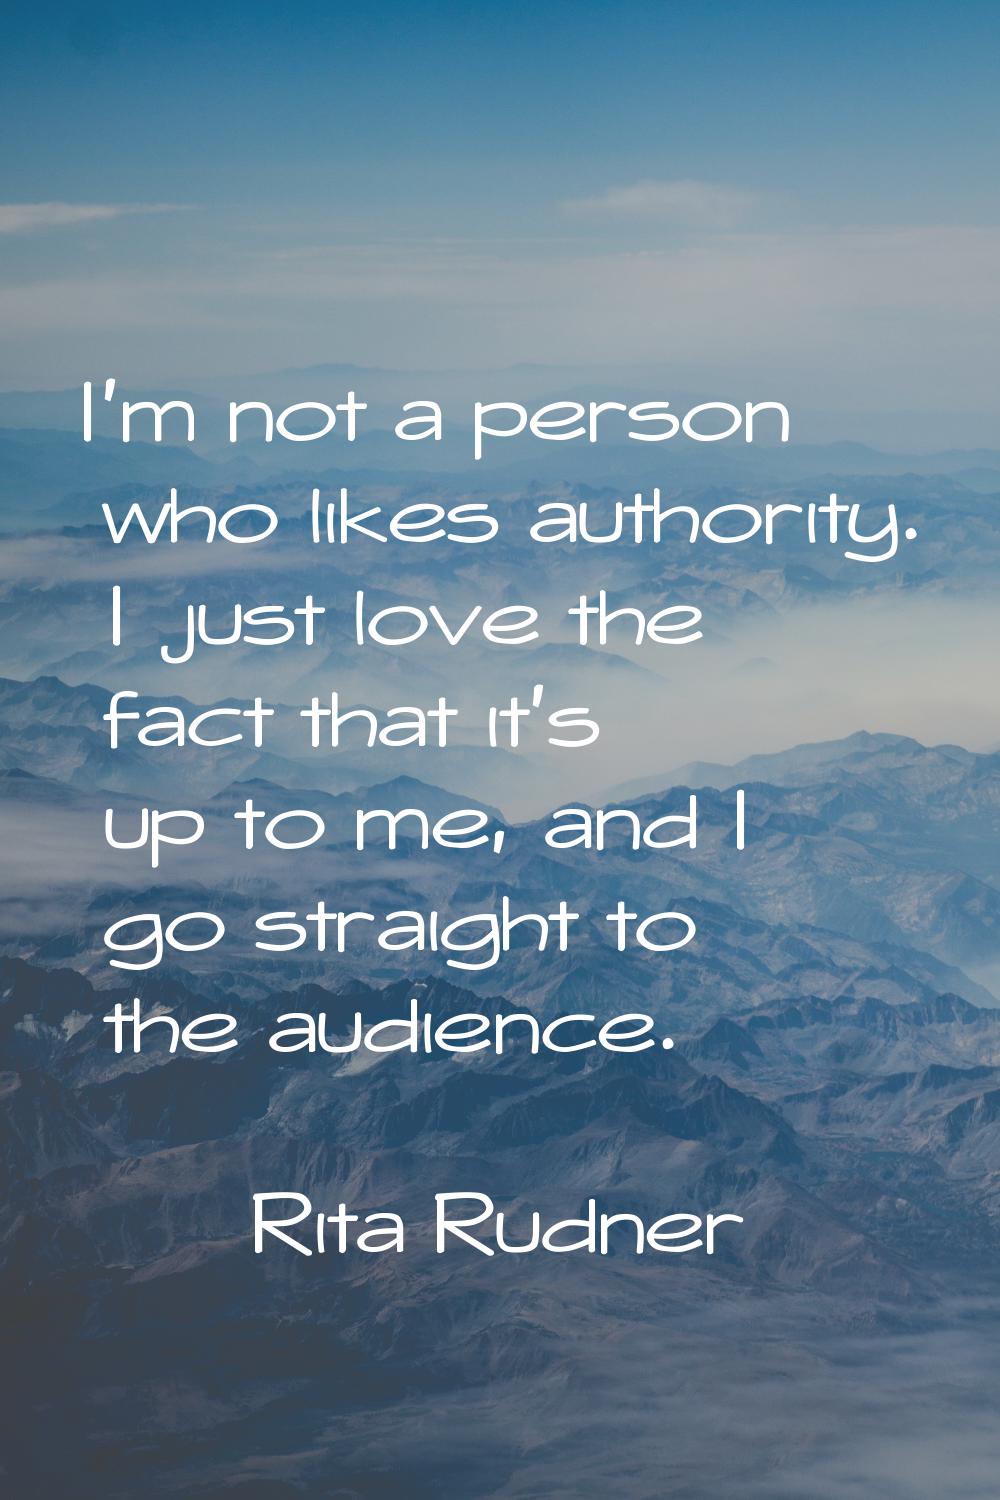 I'm not a person who likes authority. I just love the fact that it's up to me, and I go straight to